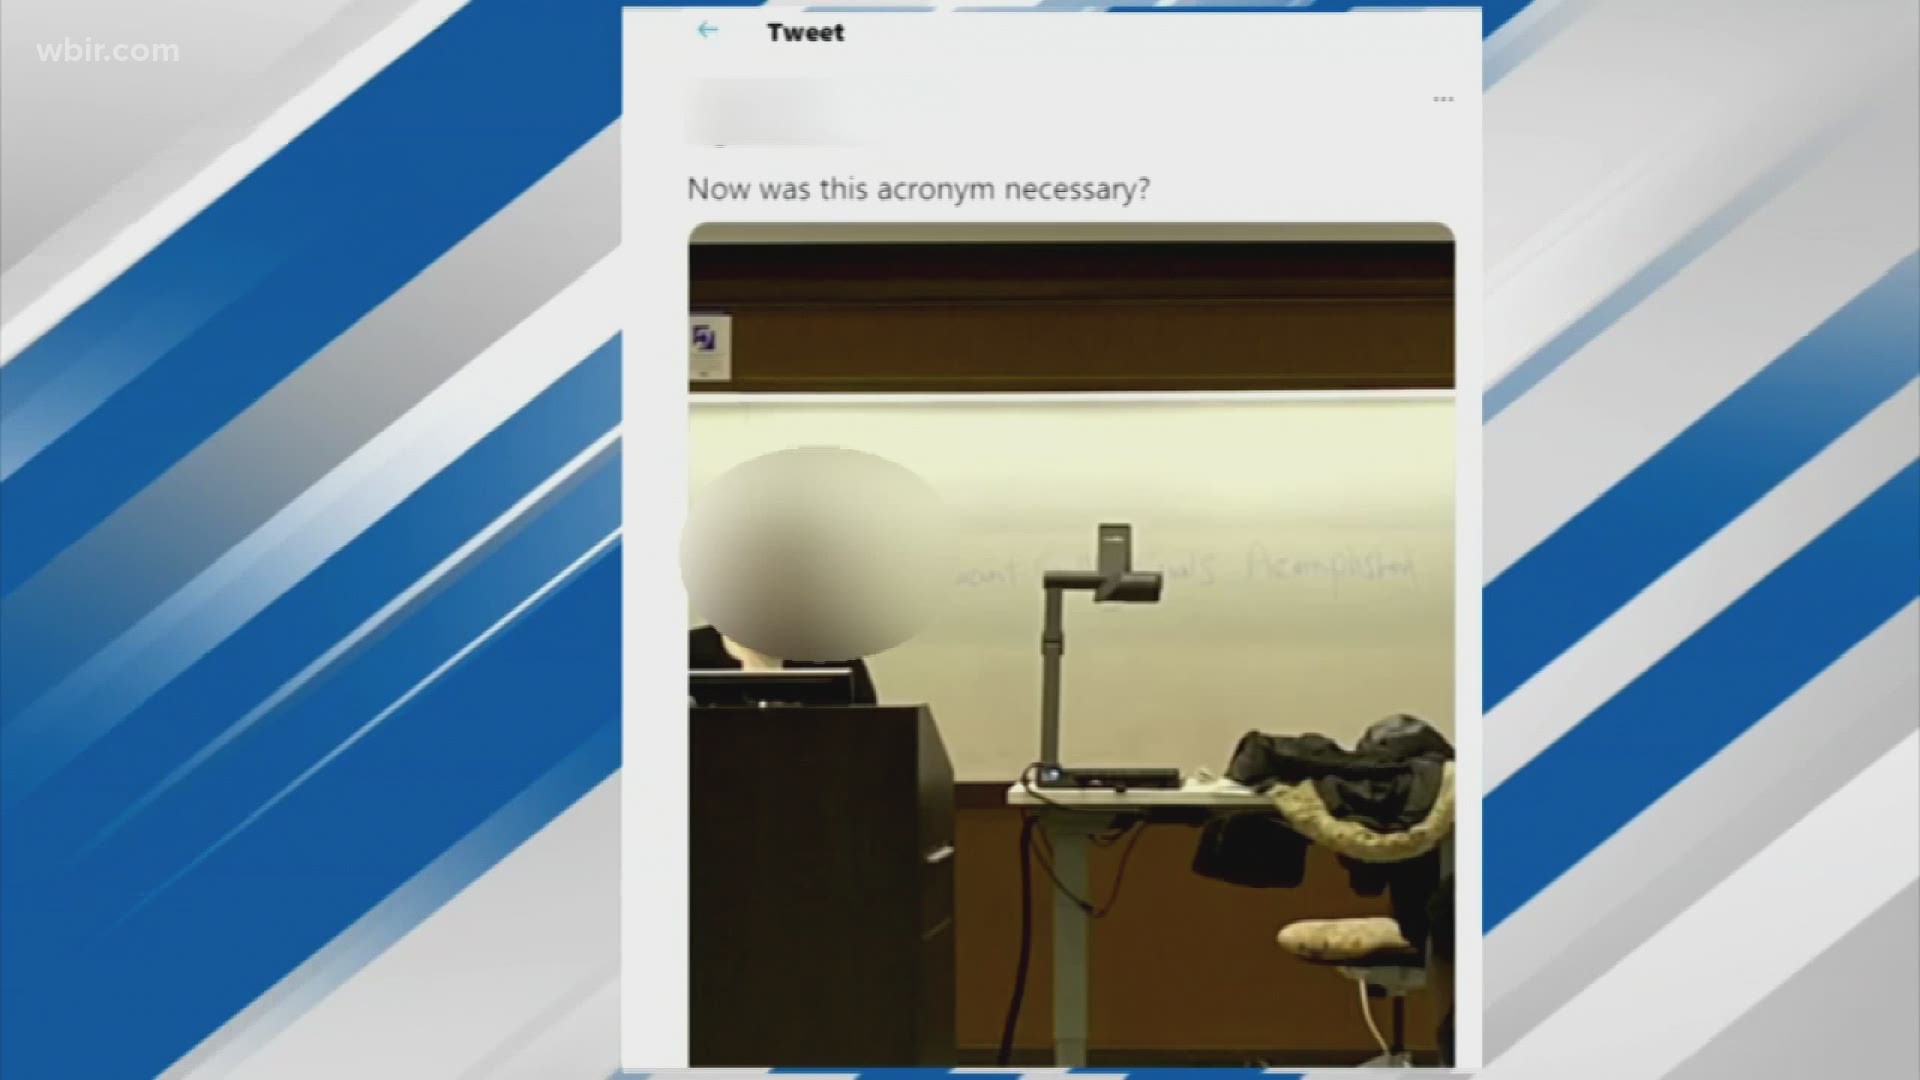 students at the University of Tennessee are calling for the professor to be fired after a tweet showed her using a racial slur as part of a lesson plan.